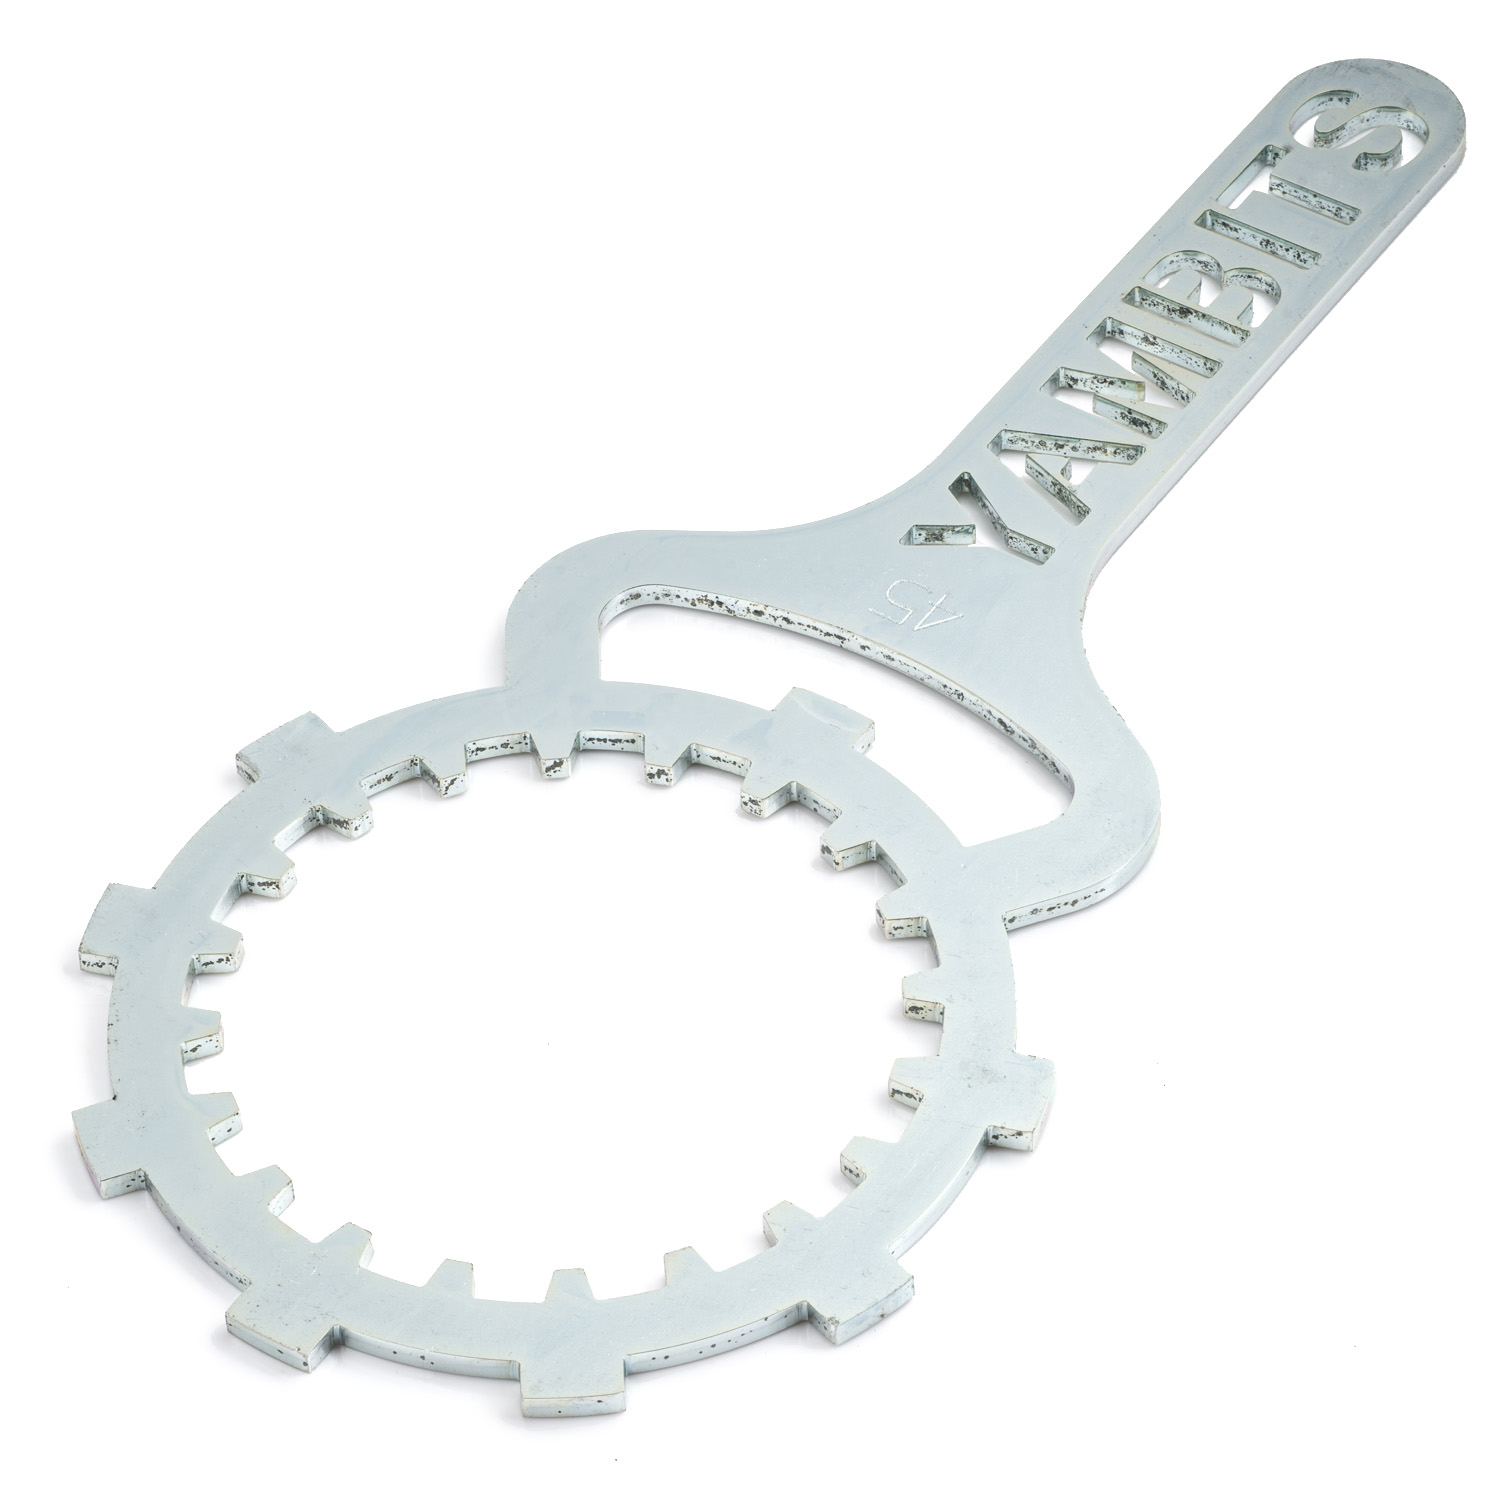 TW225 Clutch Holding Tool